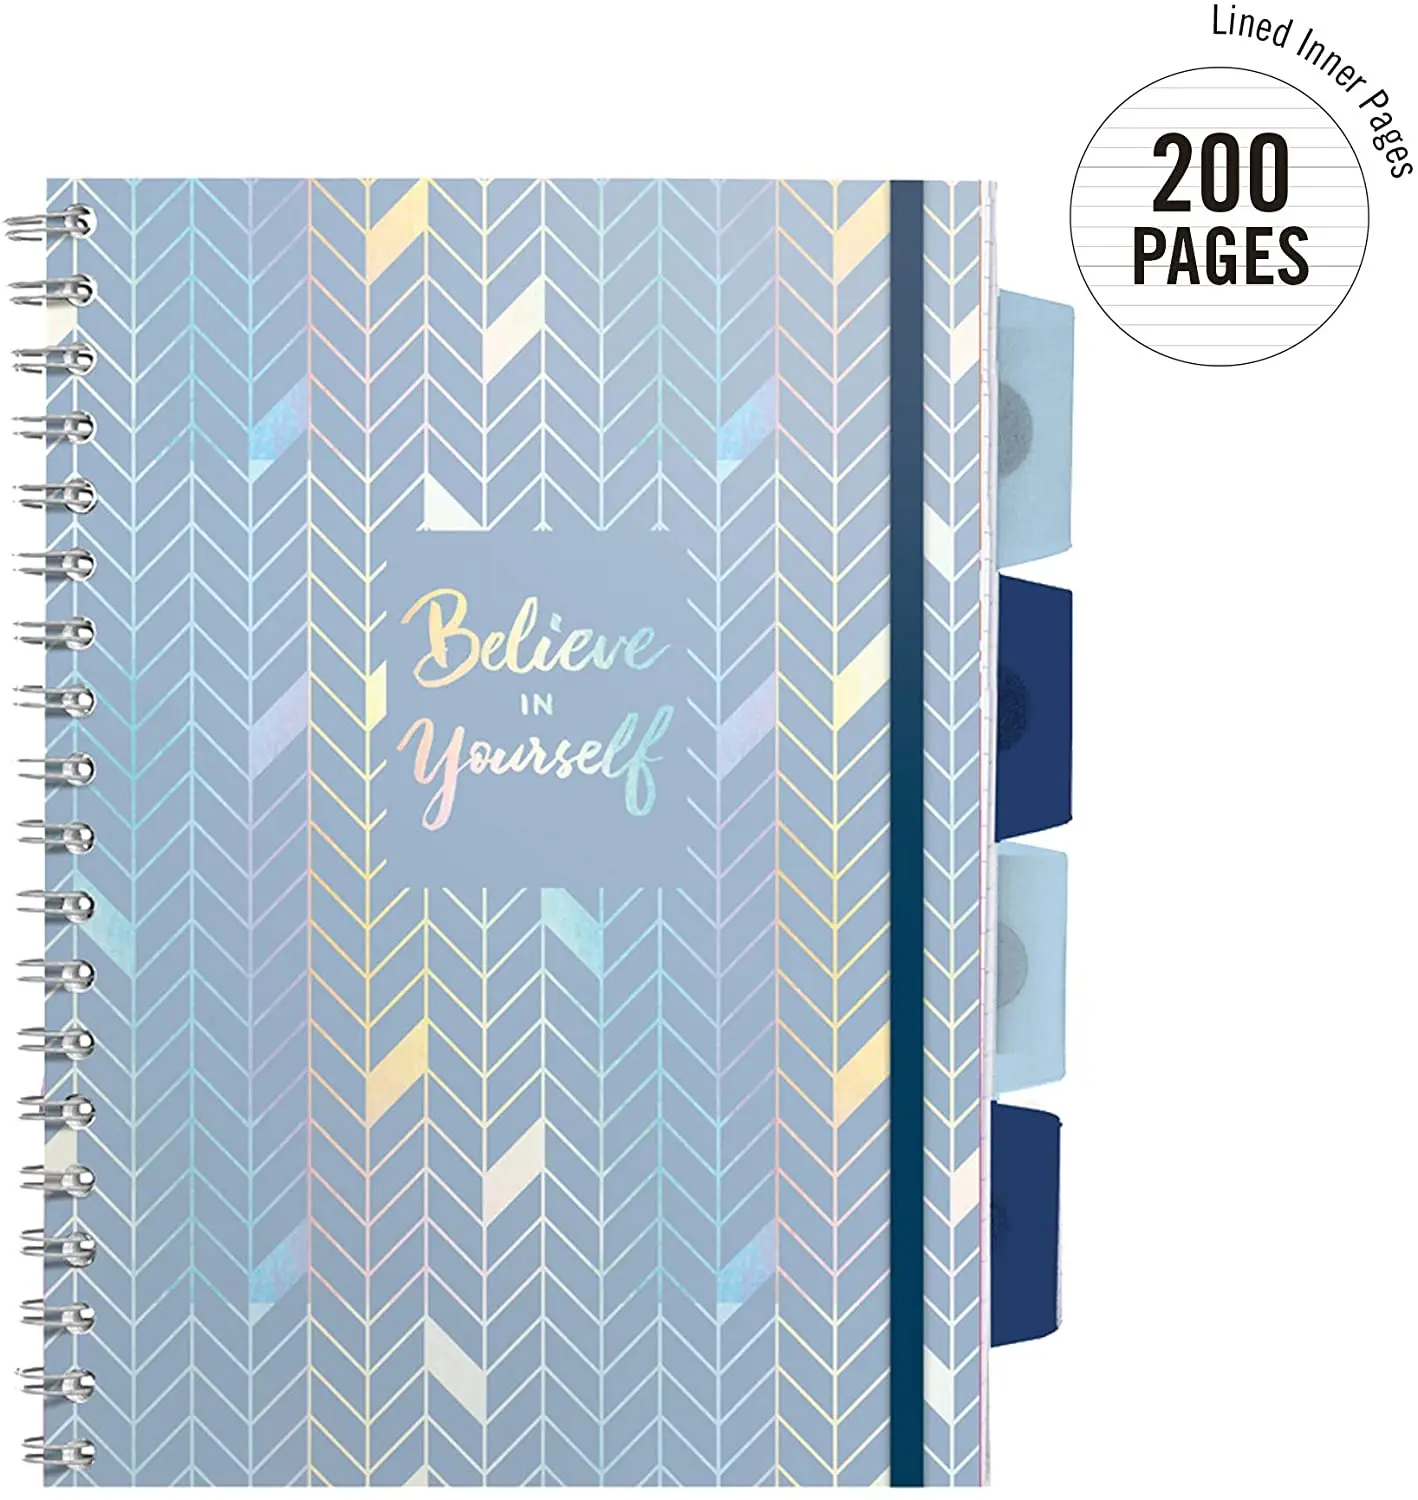 Cheap Bulk Custom Blue Sublimation Printing Spiral Notebooks With Colored Index Tab Divider